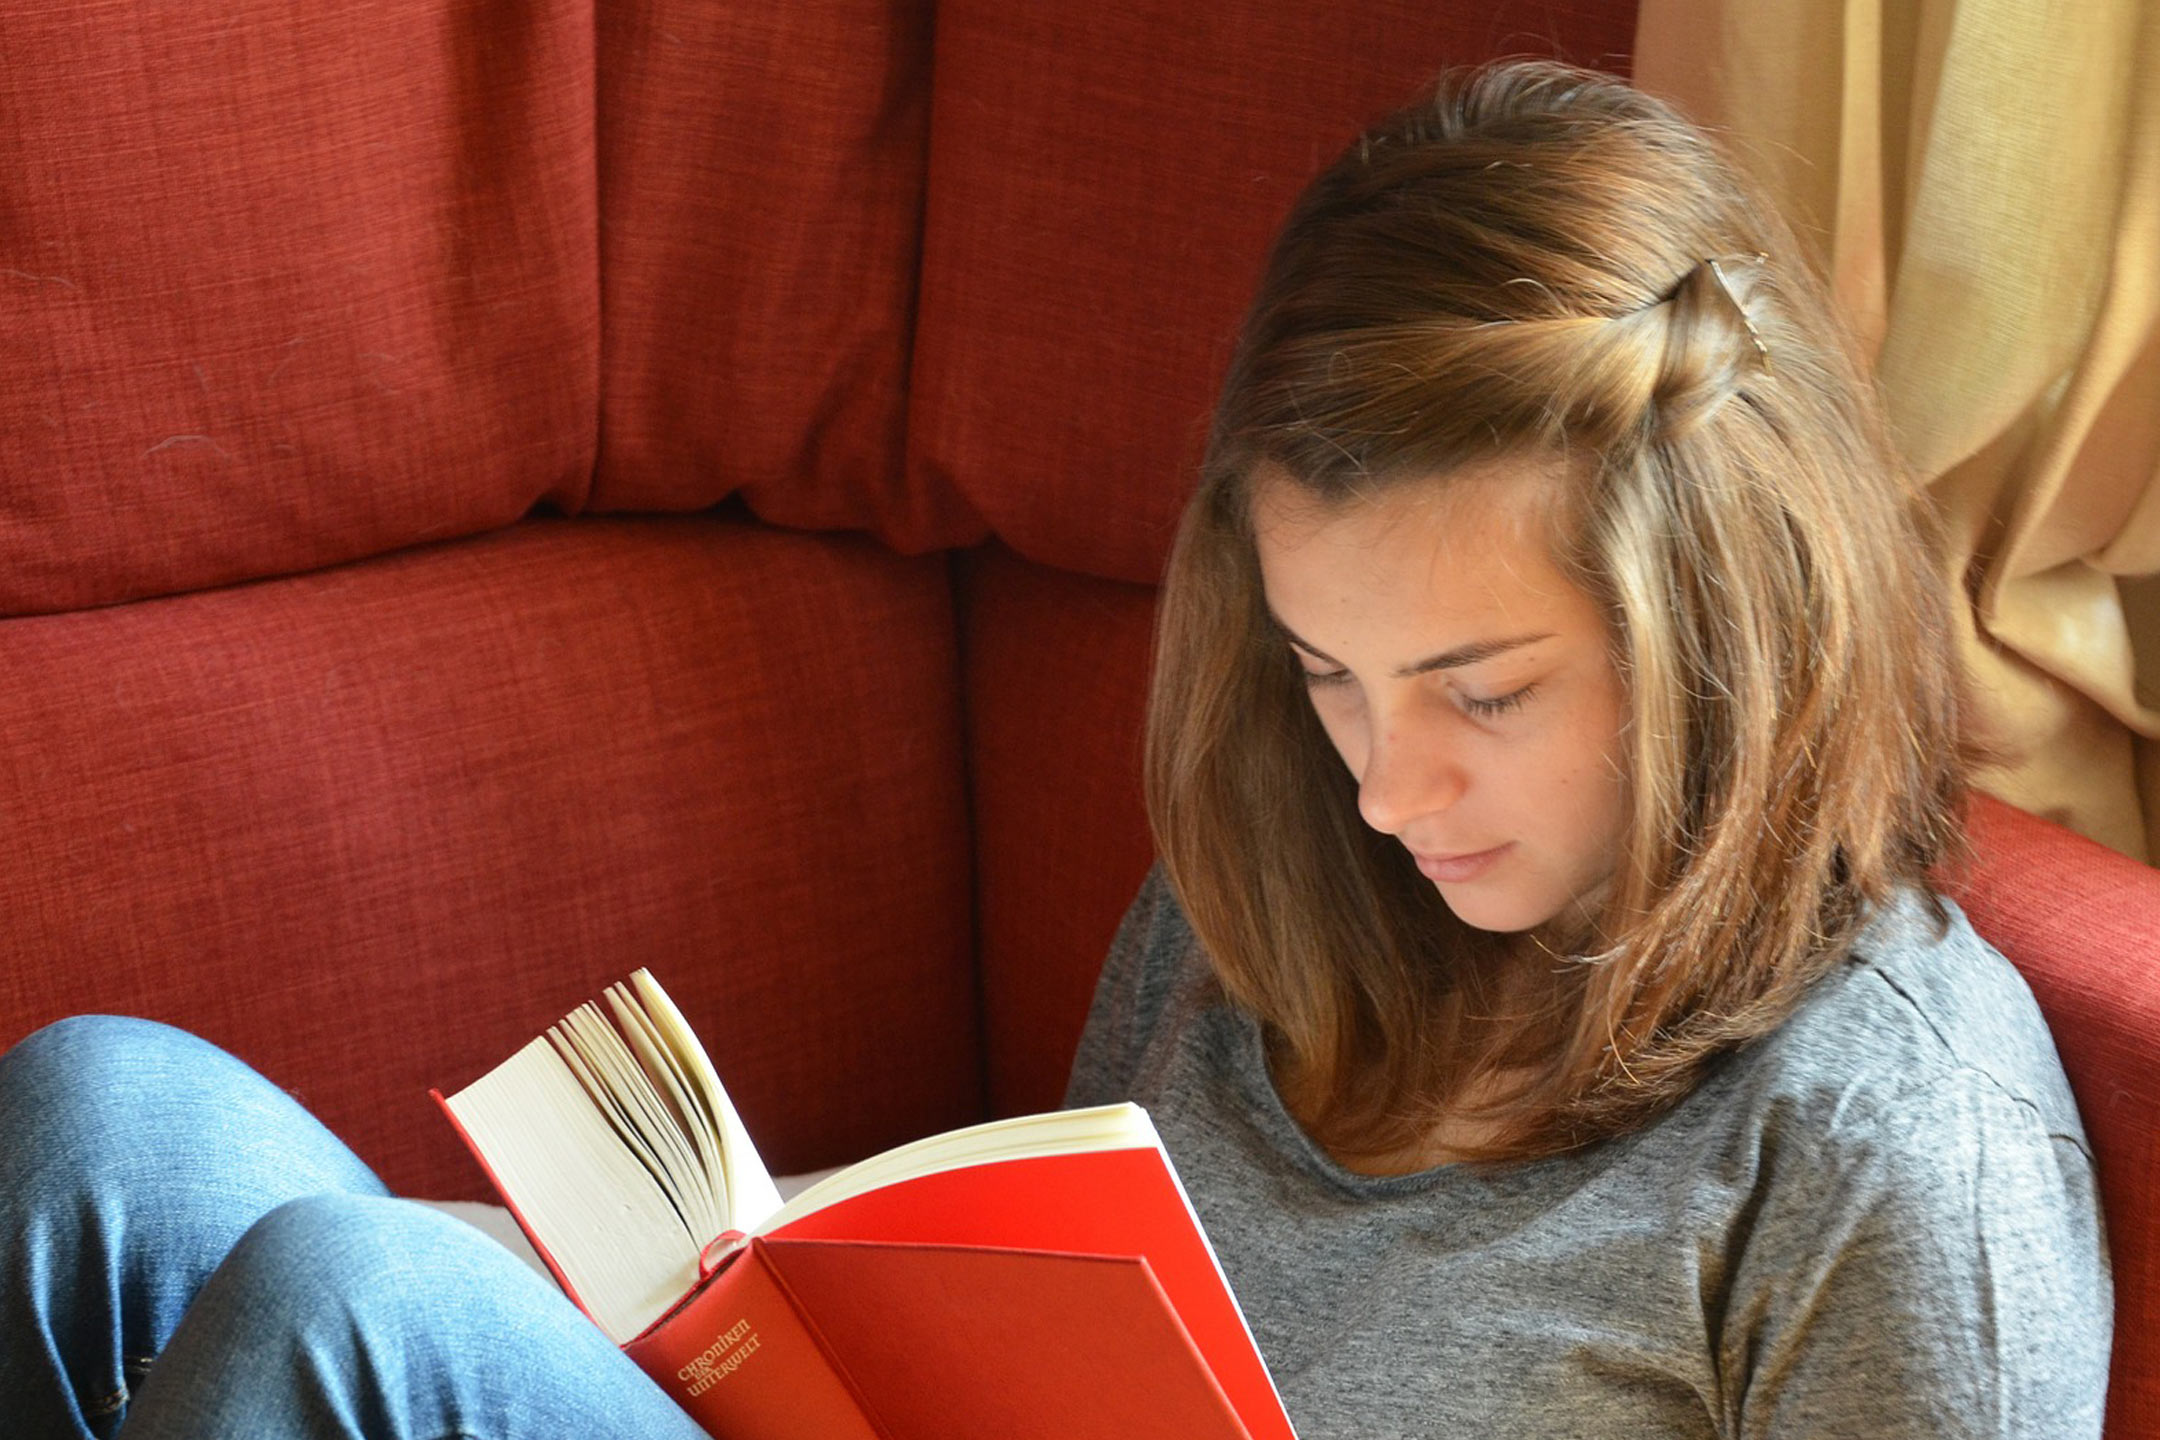 teen-reading-on-couch2160